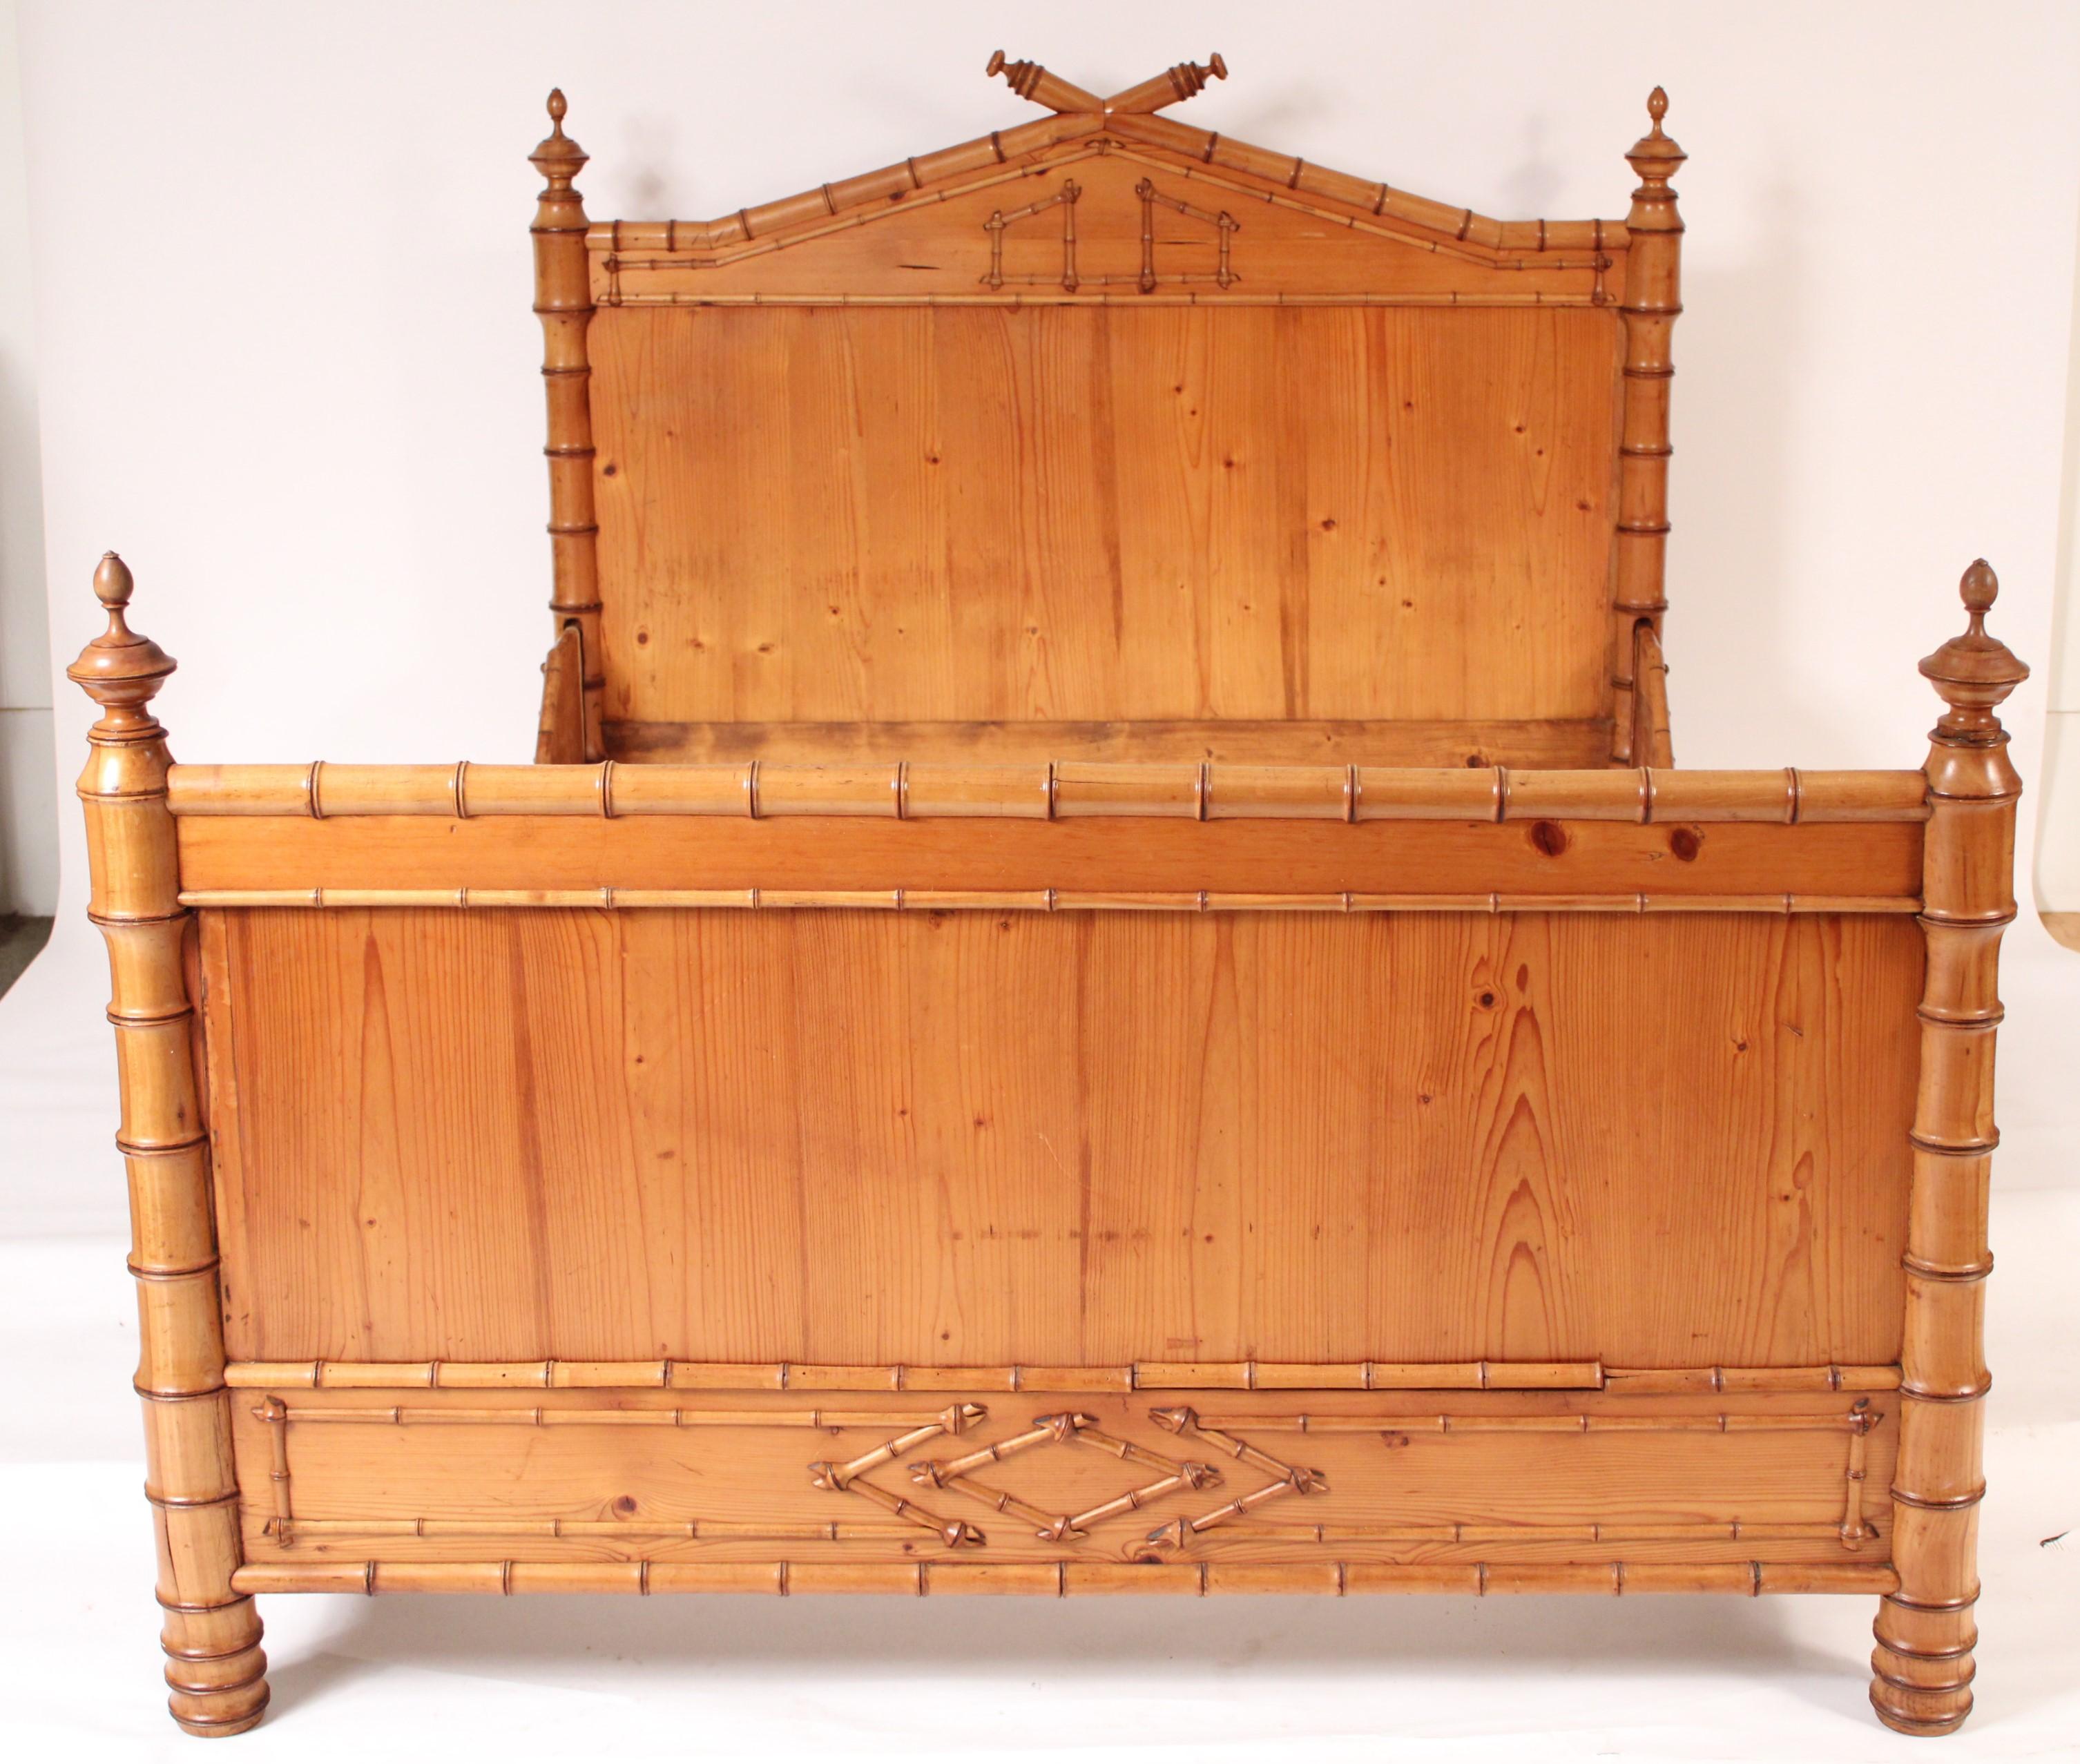 Aesthetic movement faux bamboo, pine and birch bedframe, circa 1910. With headboard, footboard and rails. The faux bamboo decoration is birch and the panels on the headboard and footboard are pine. Outer measurements, height 47.25